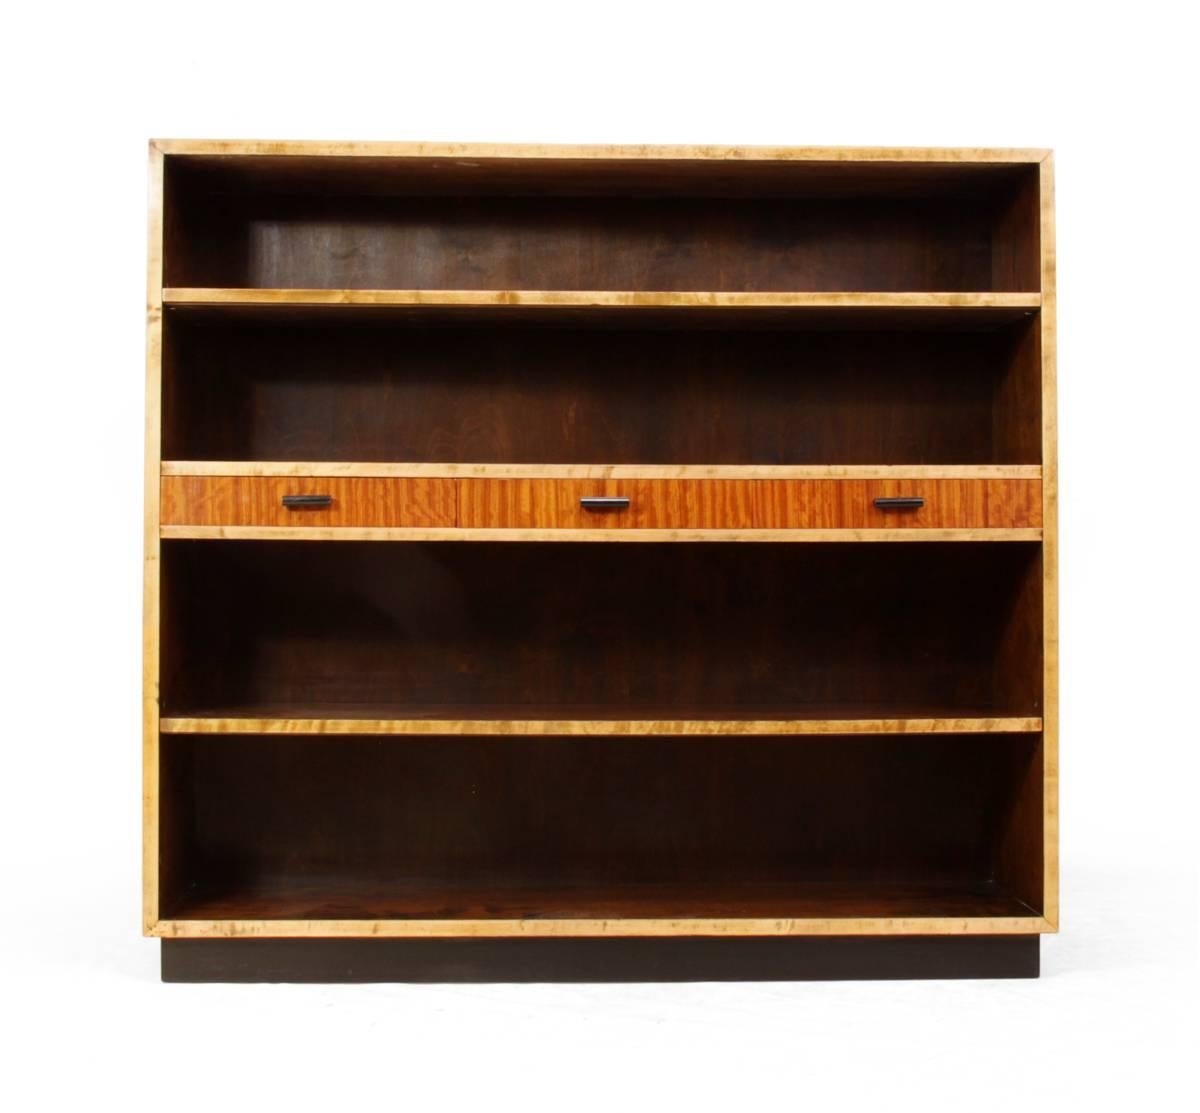 Art Deco open bookshelves, circa 1930.
This Art Deco open bookshelves has three central drawers and adjustable shelves above and below in very good condition
Age: 1930
Style: Art Deco
Material: Chestnut
Condition: Very good
Dimensions: 120 H x